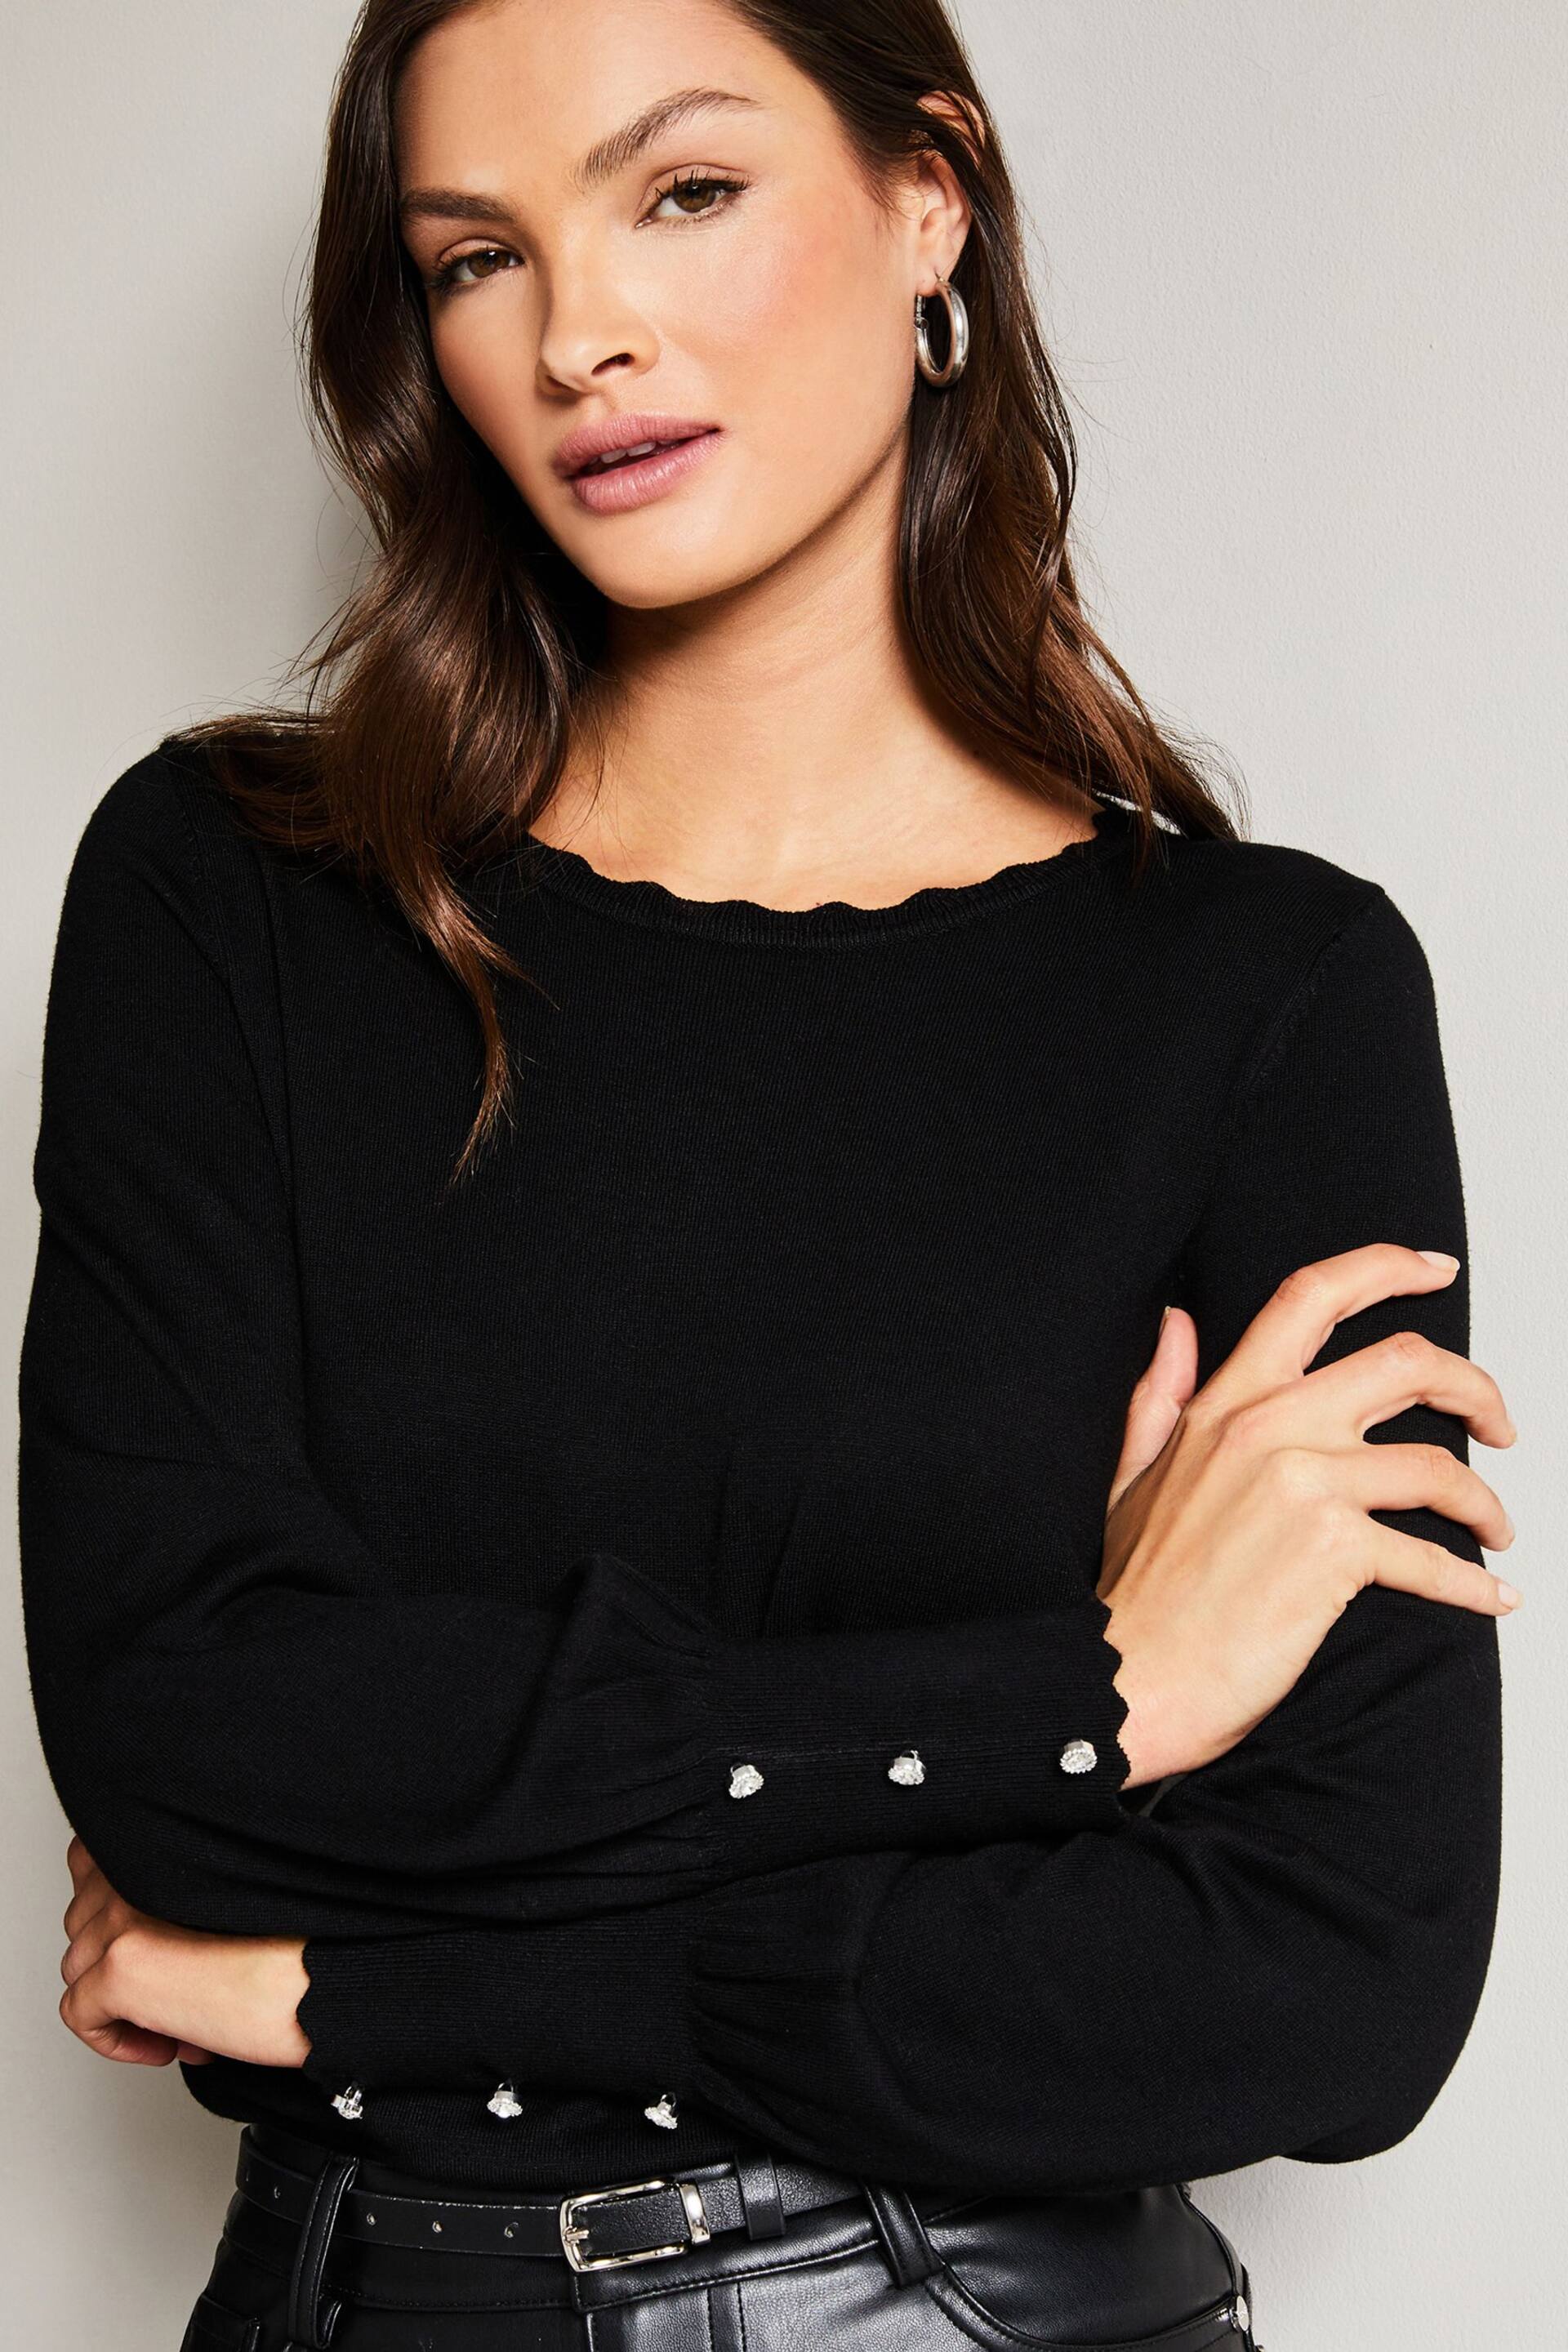 Lipsy Black Scallop Detail Long Sleeve Knitted Jumper - Image 4 of 4